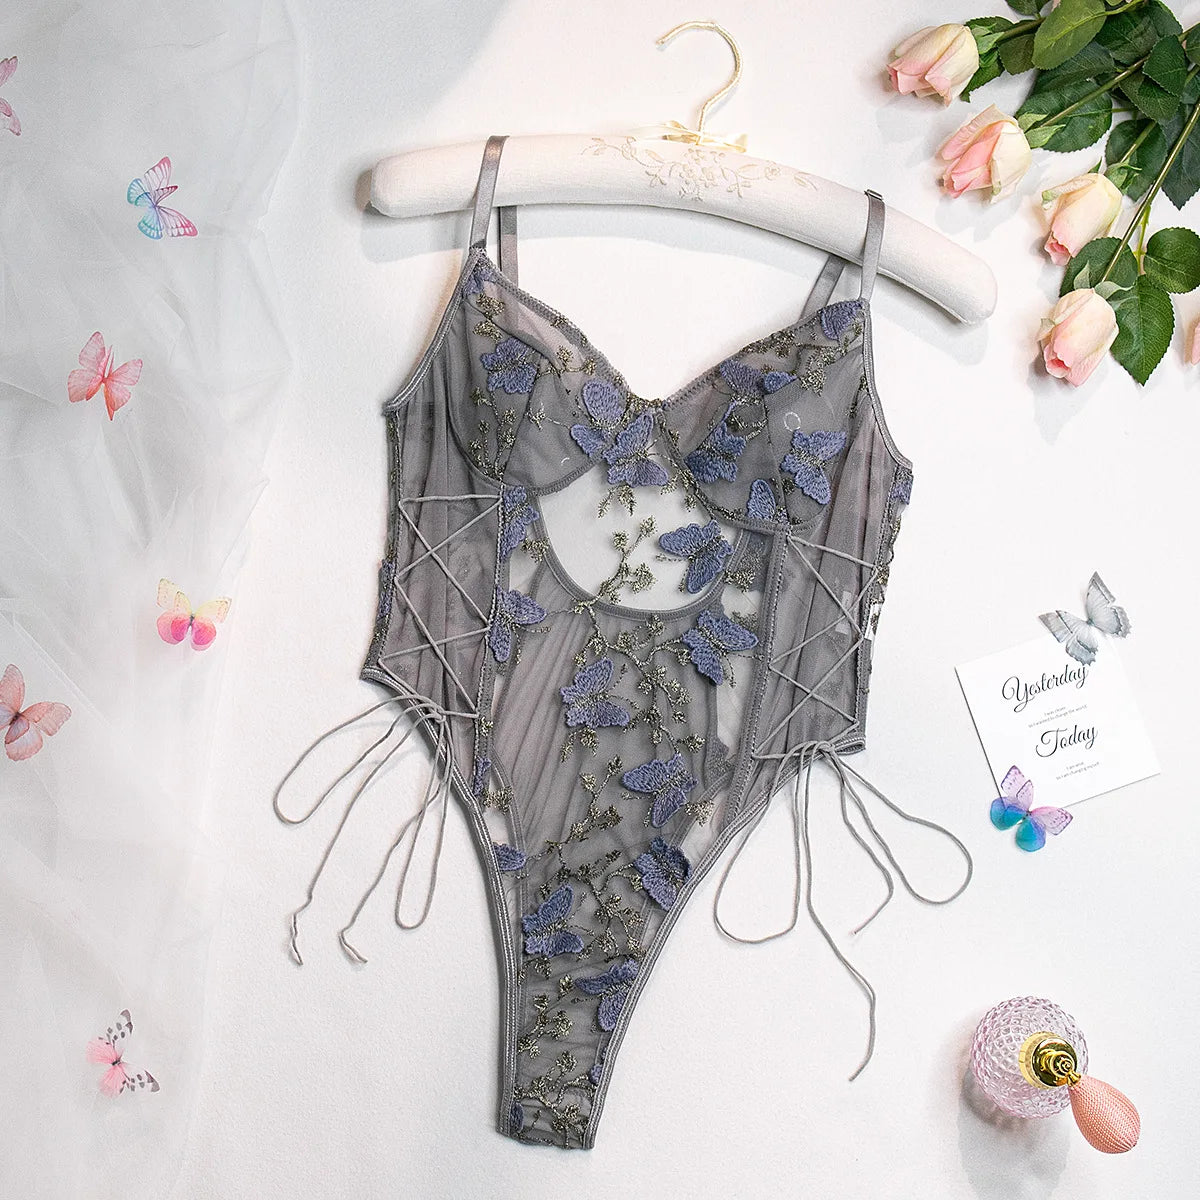 Wanita Floral Embroidery Sheer Playsuits Women Strap Butterfly  Nightwear Lace Up Slim Mesh Backless Sexy Bodysuits